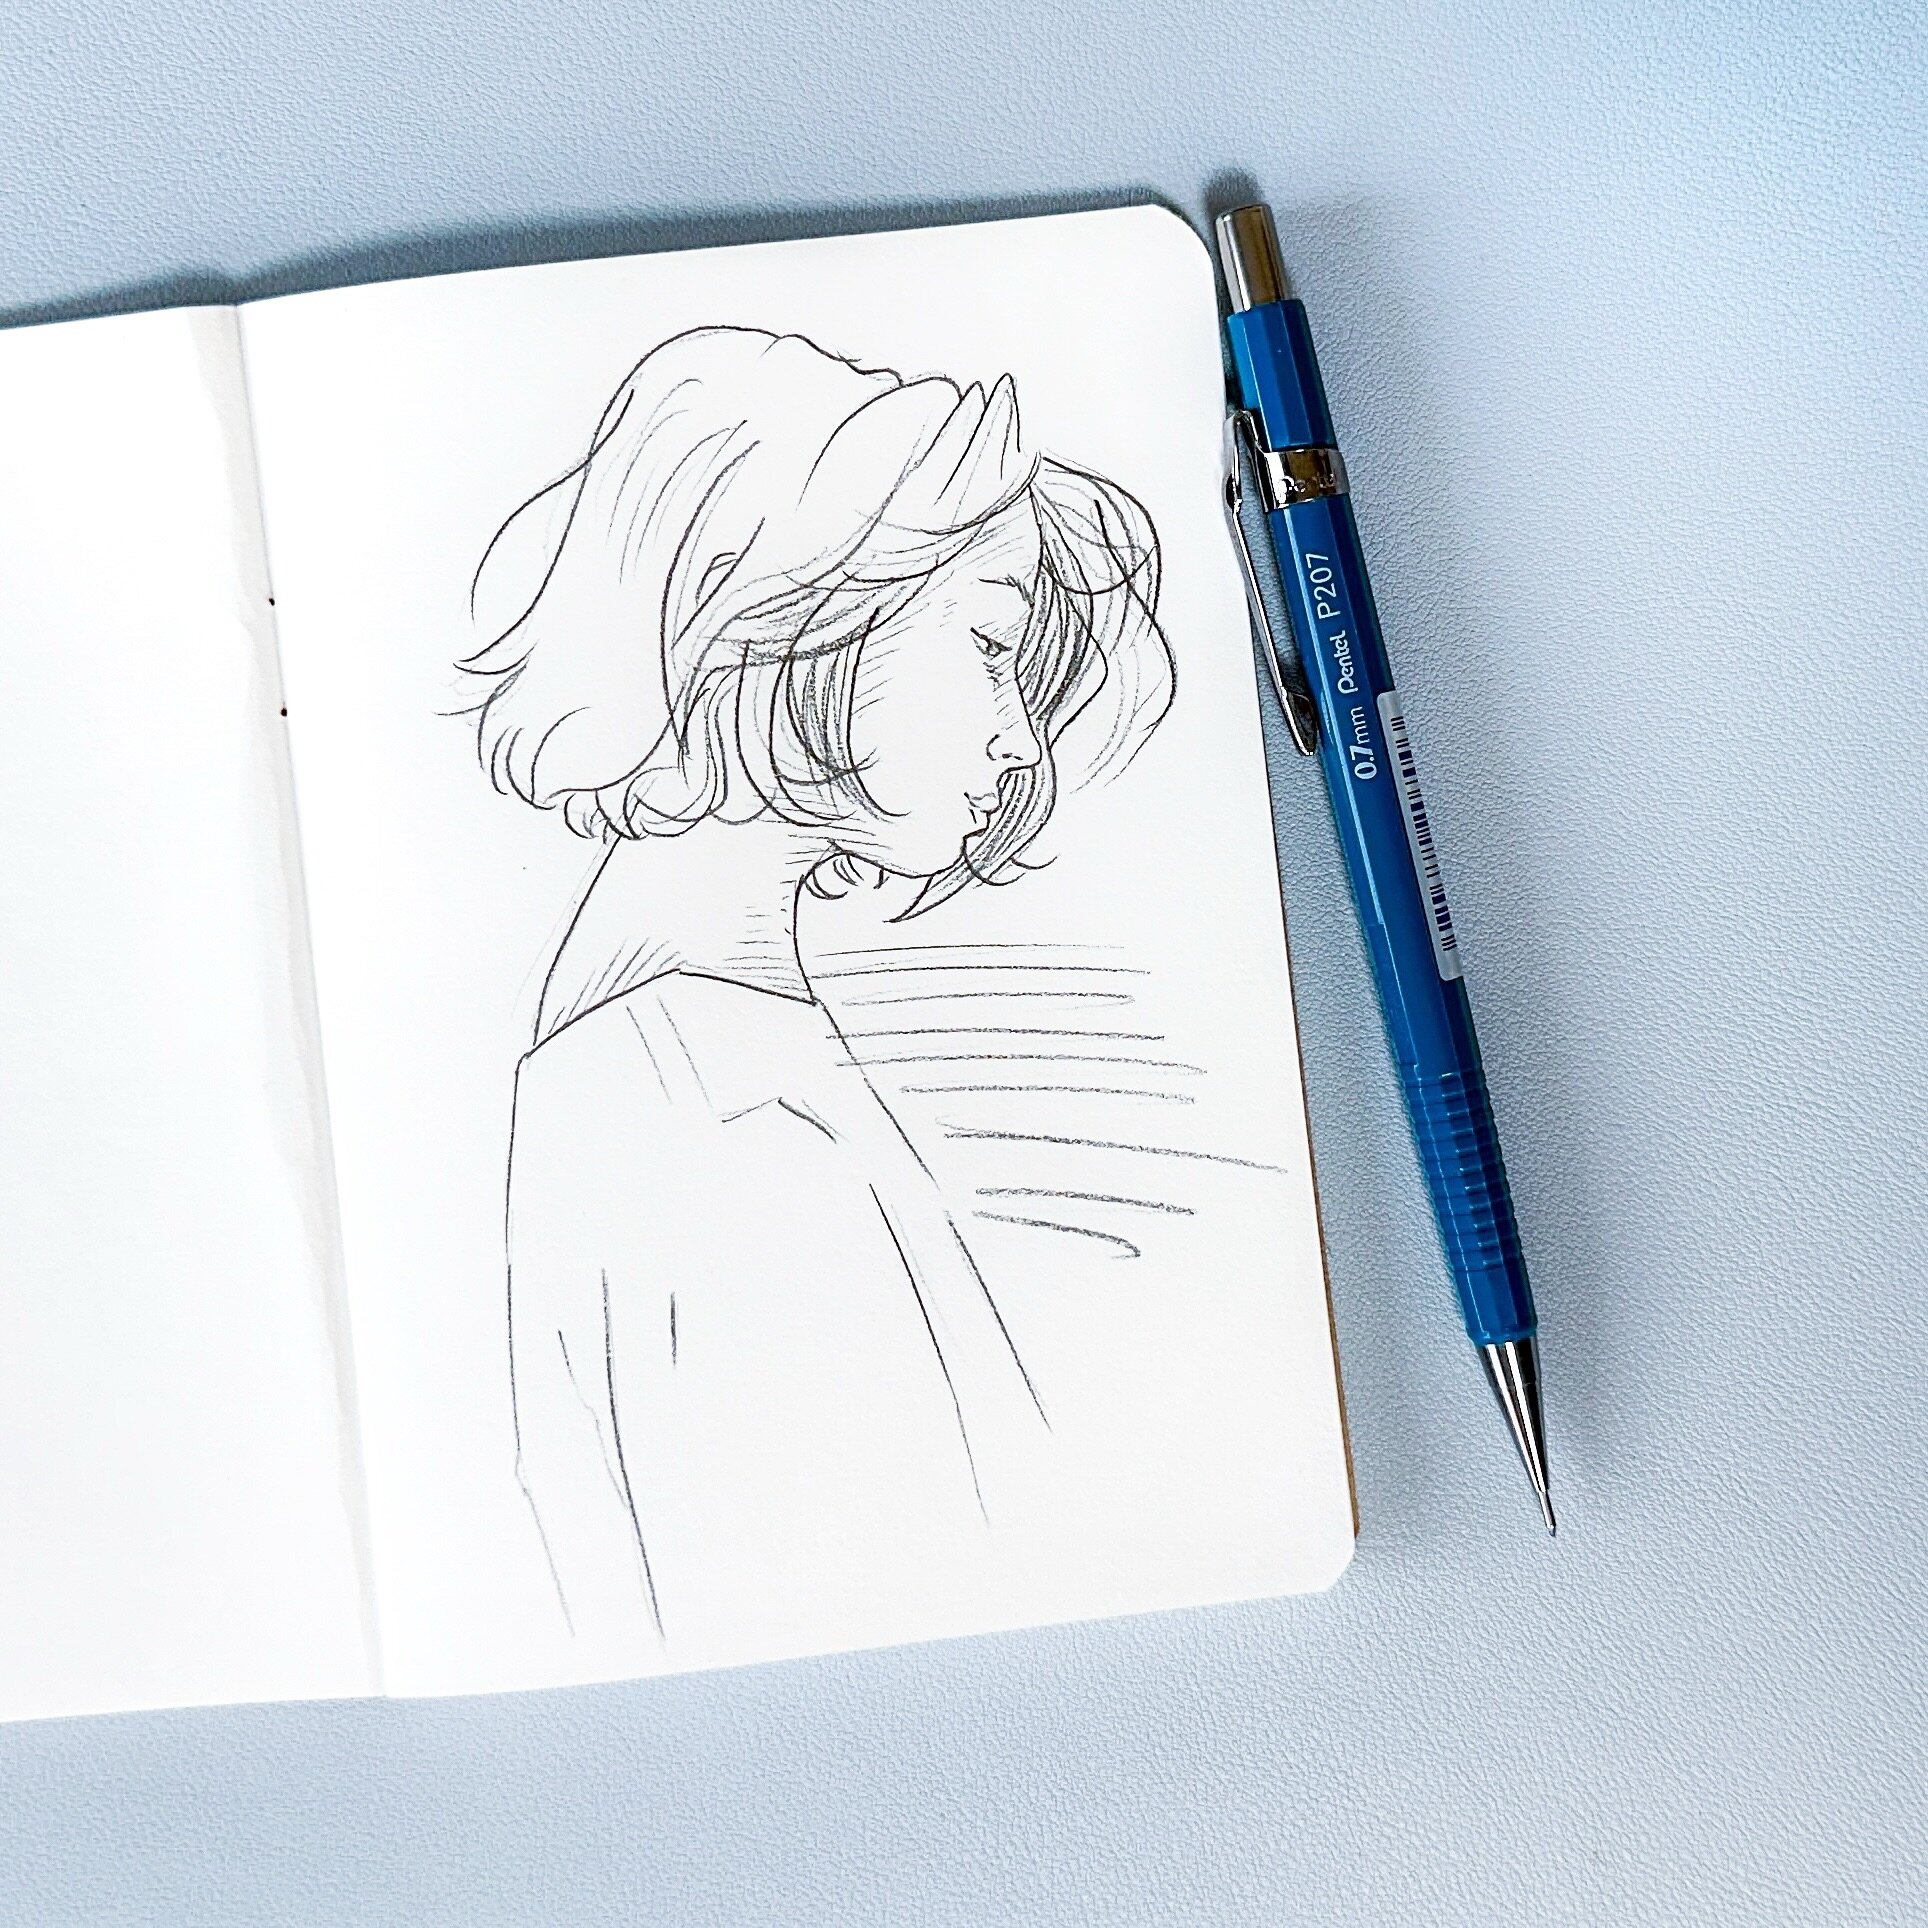 I bought this little sketchbook so I can do a very quick sketch each day, and not care what it looks like. If it&rsquo;s a very busy day, then at least I&rsquo;m doing some art. If I have more time, then it&rsquo;s a nice little warm-up!
.
.
#sketchb